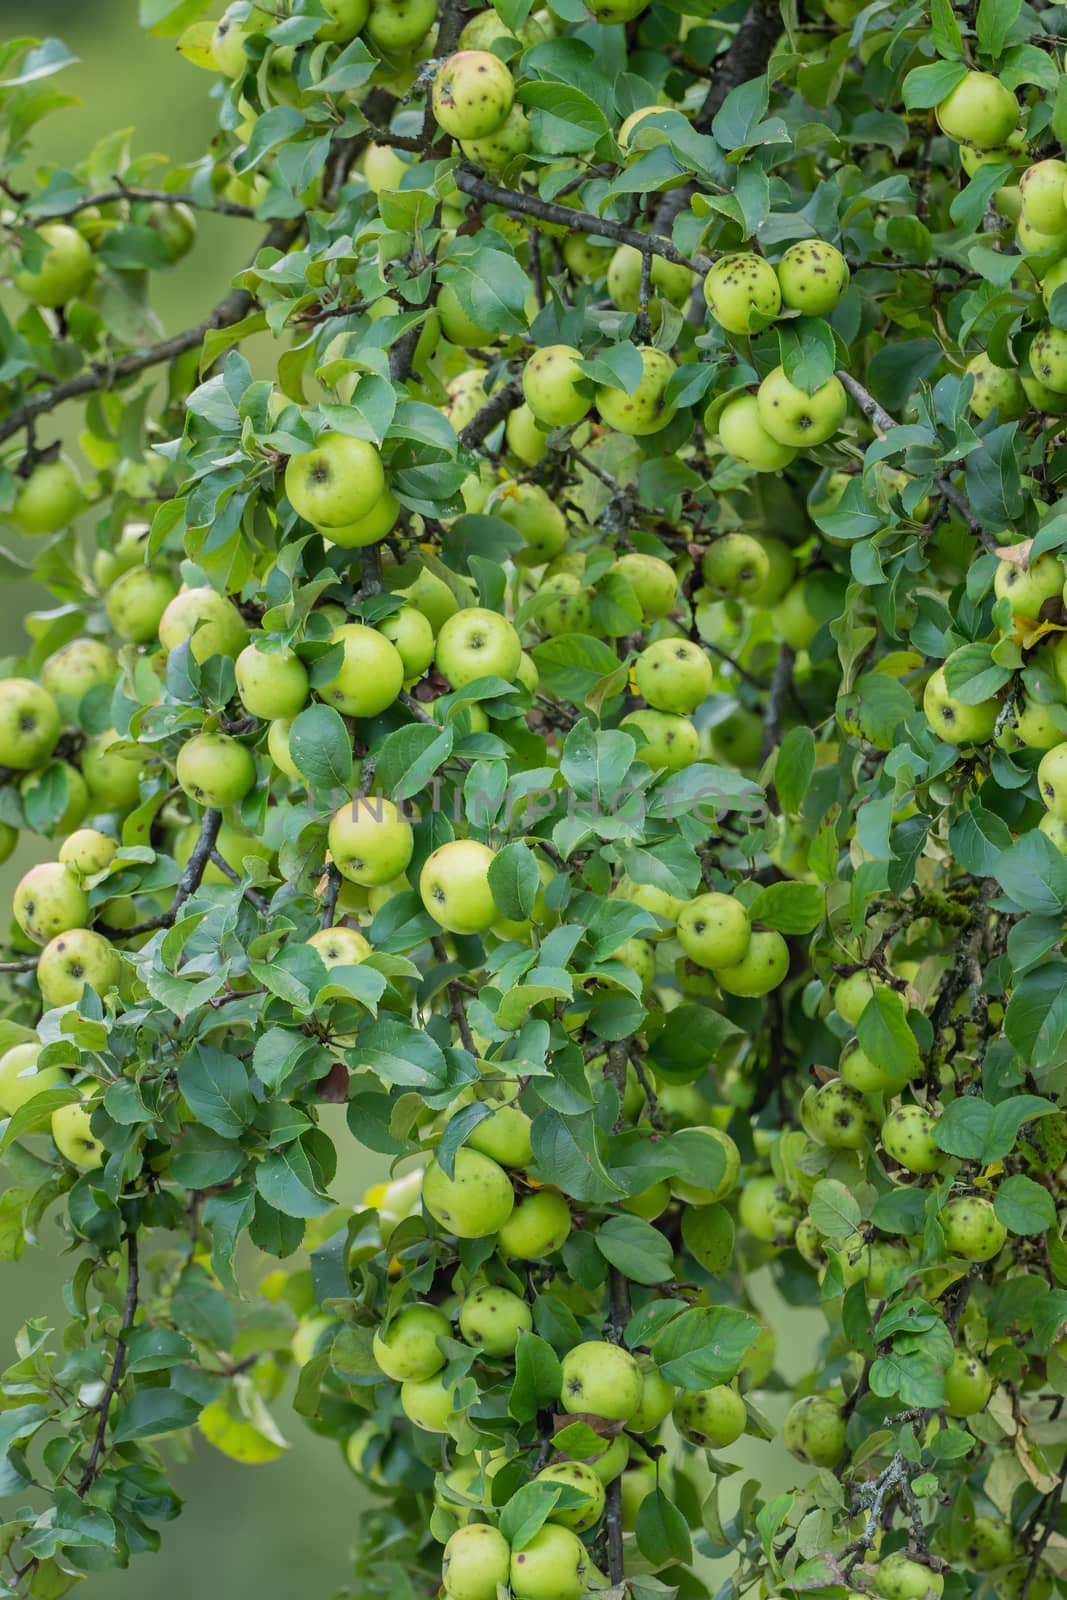 A branch full of ripe green apples